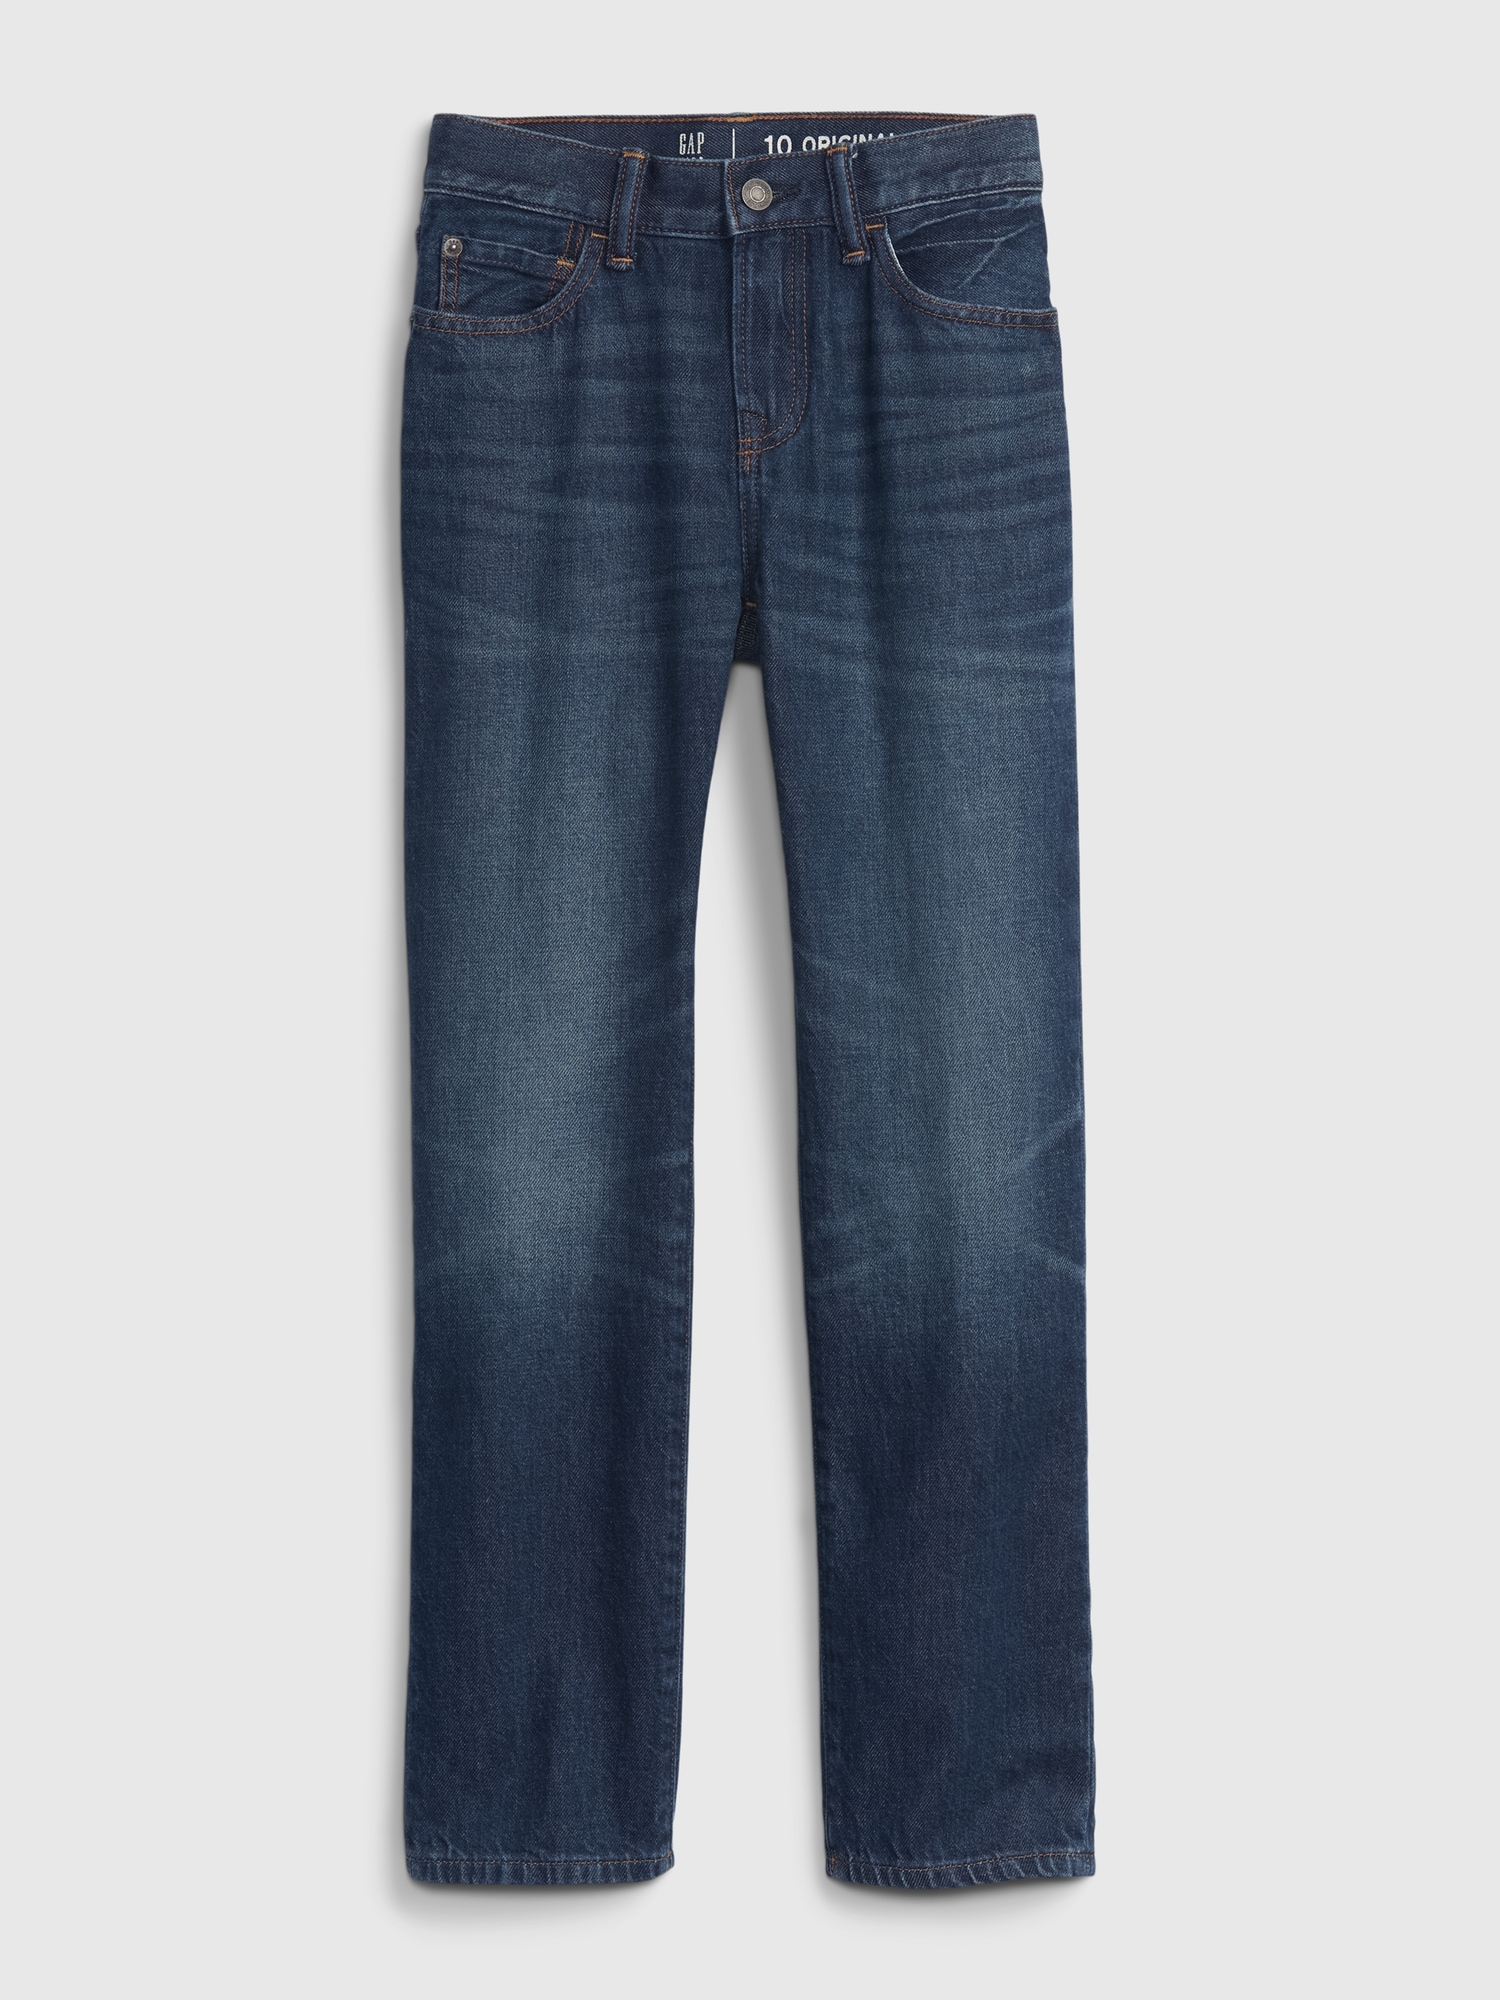 Gap Kids Original Straight Jeans with Washwell blue - 824576002